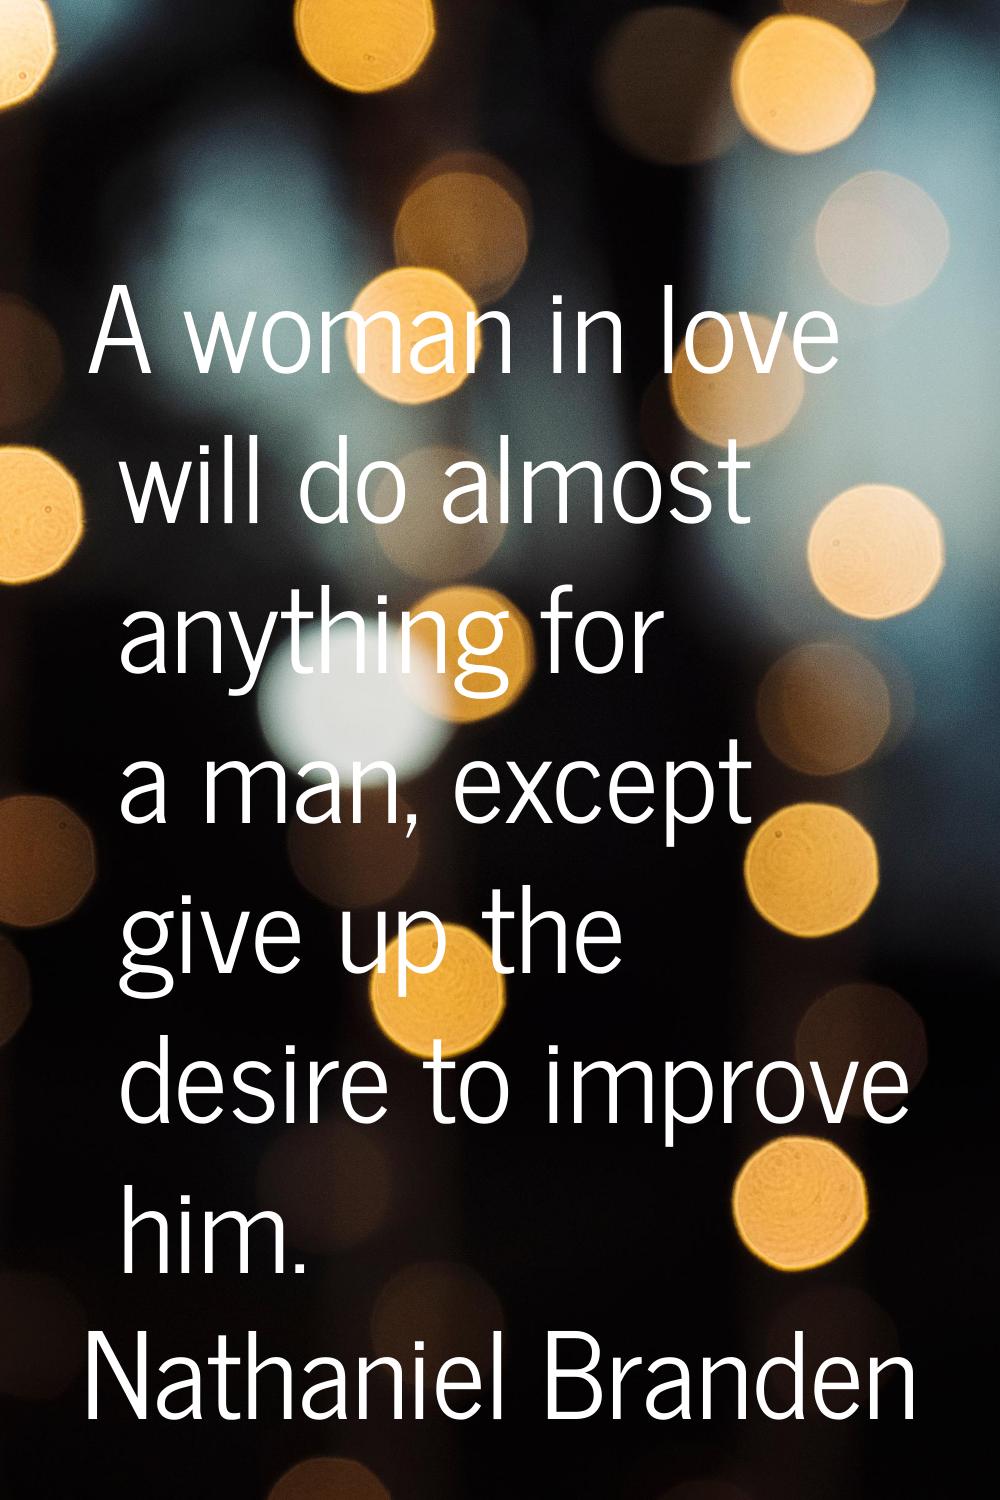 A woman in love will do almost anything for a man, except give up the desire to improve him.